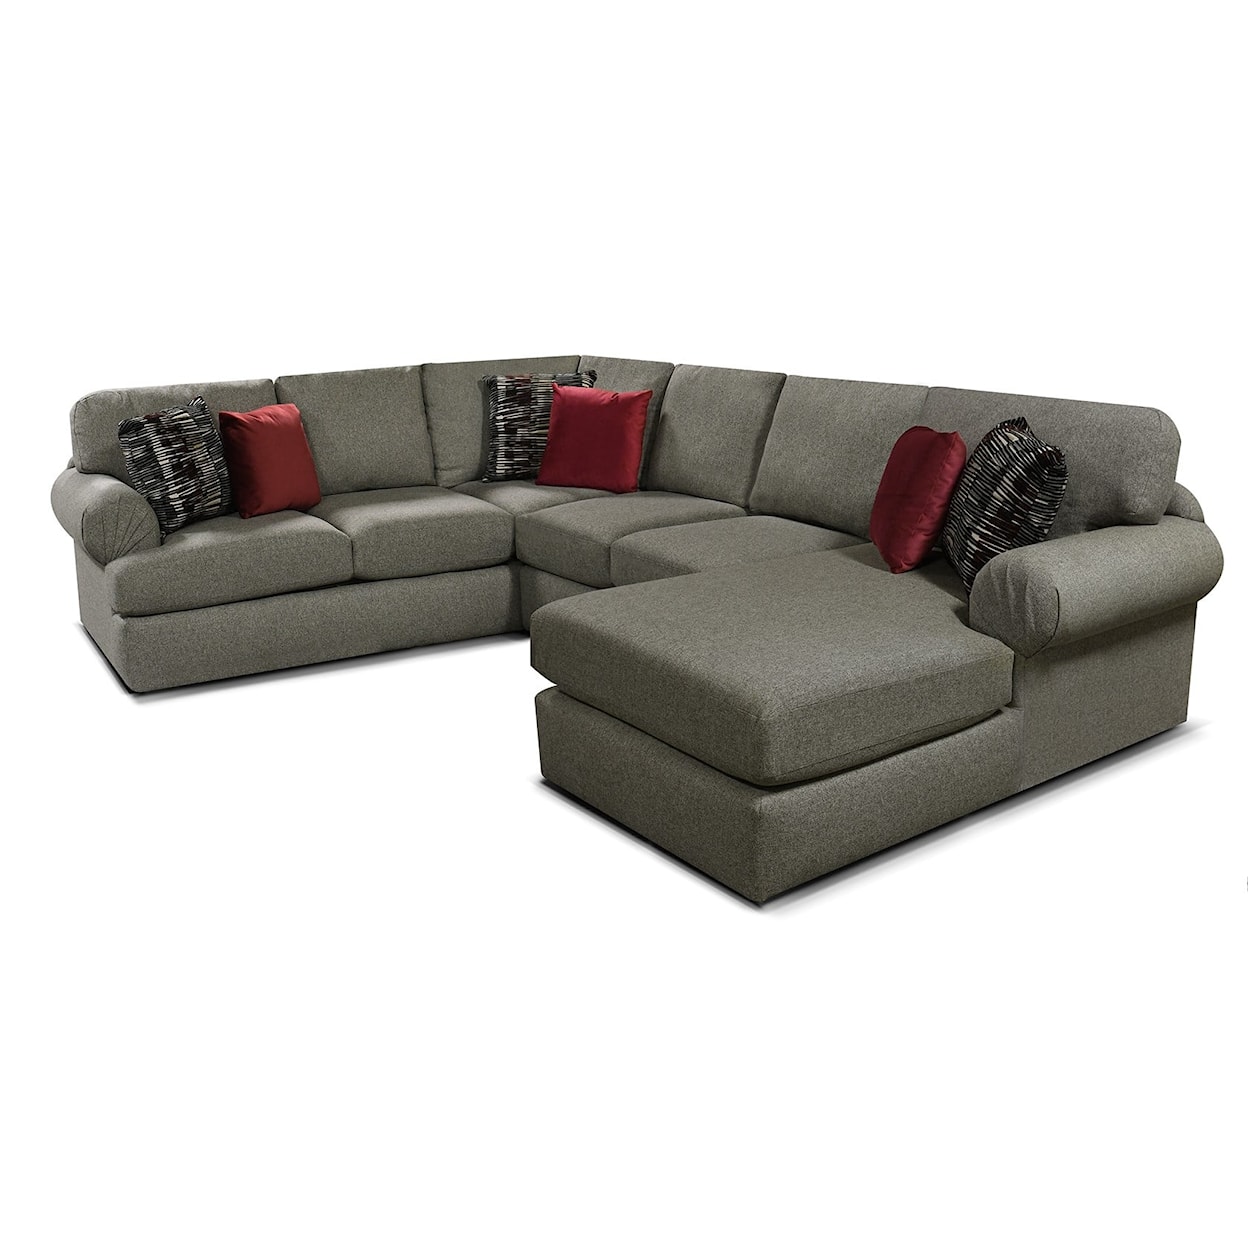 England 8250 Series Sectional Sofa with Right Chaise